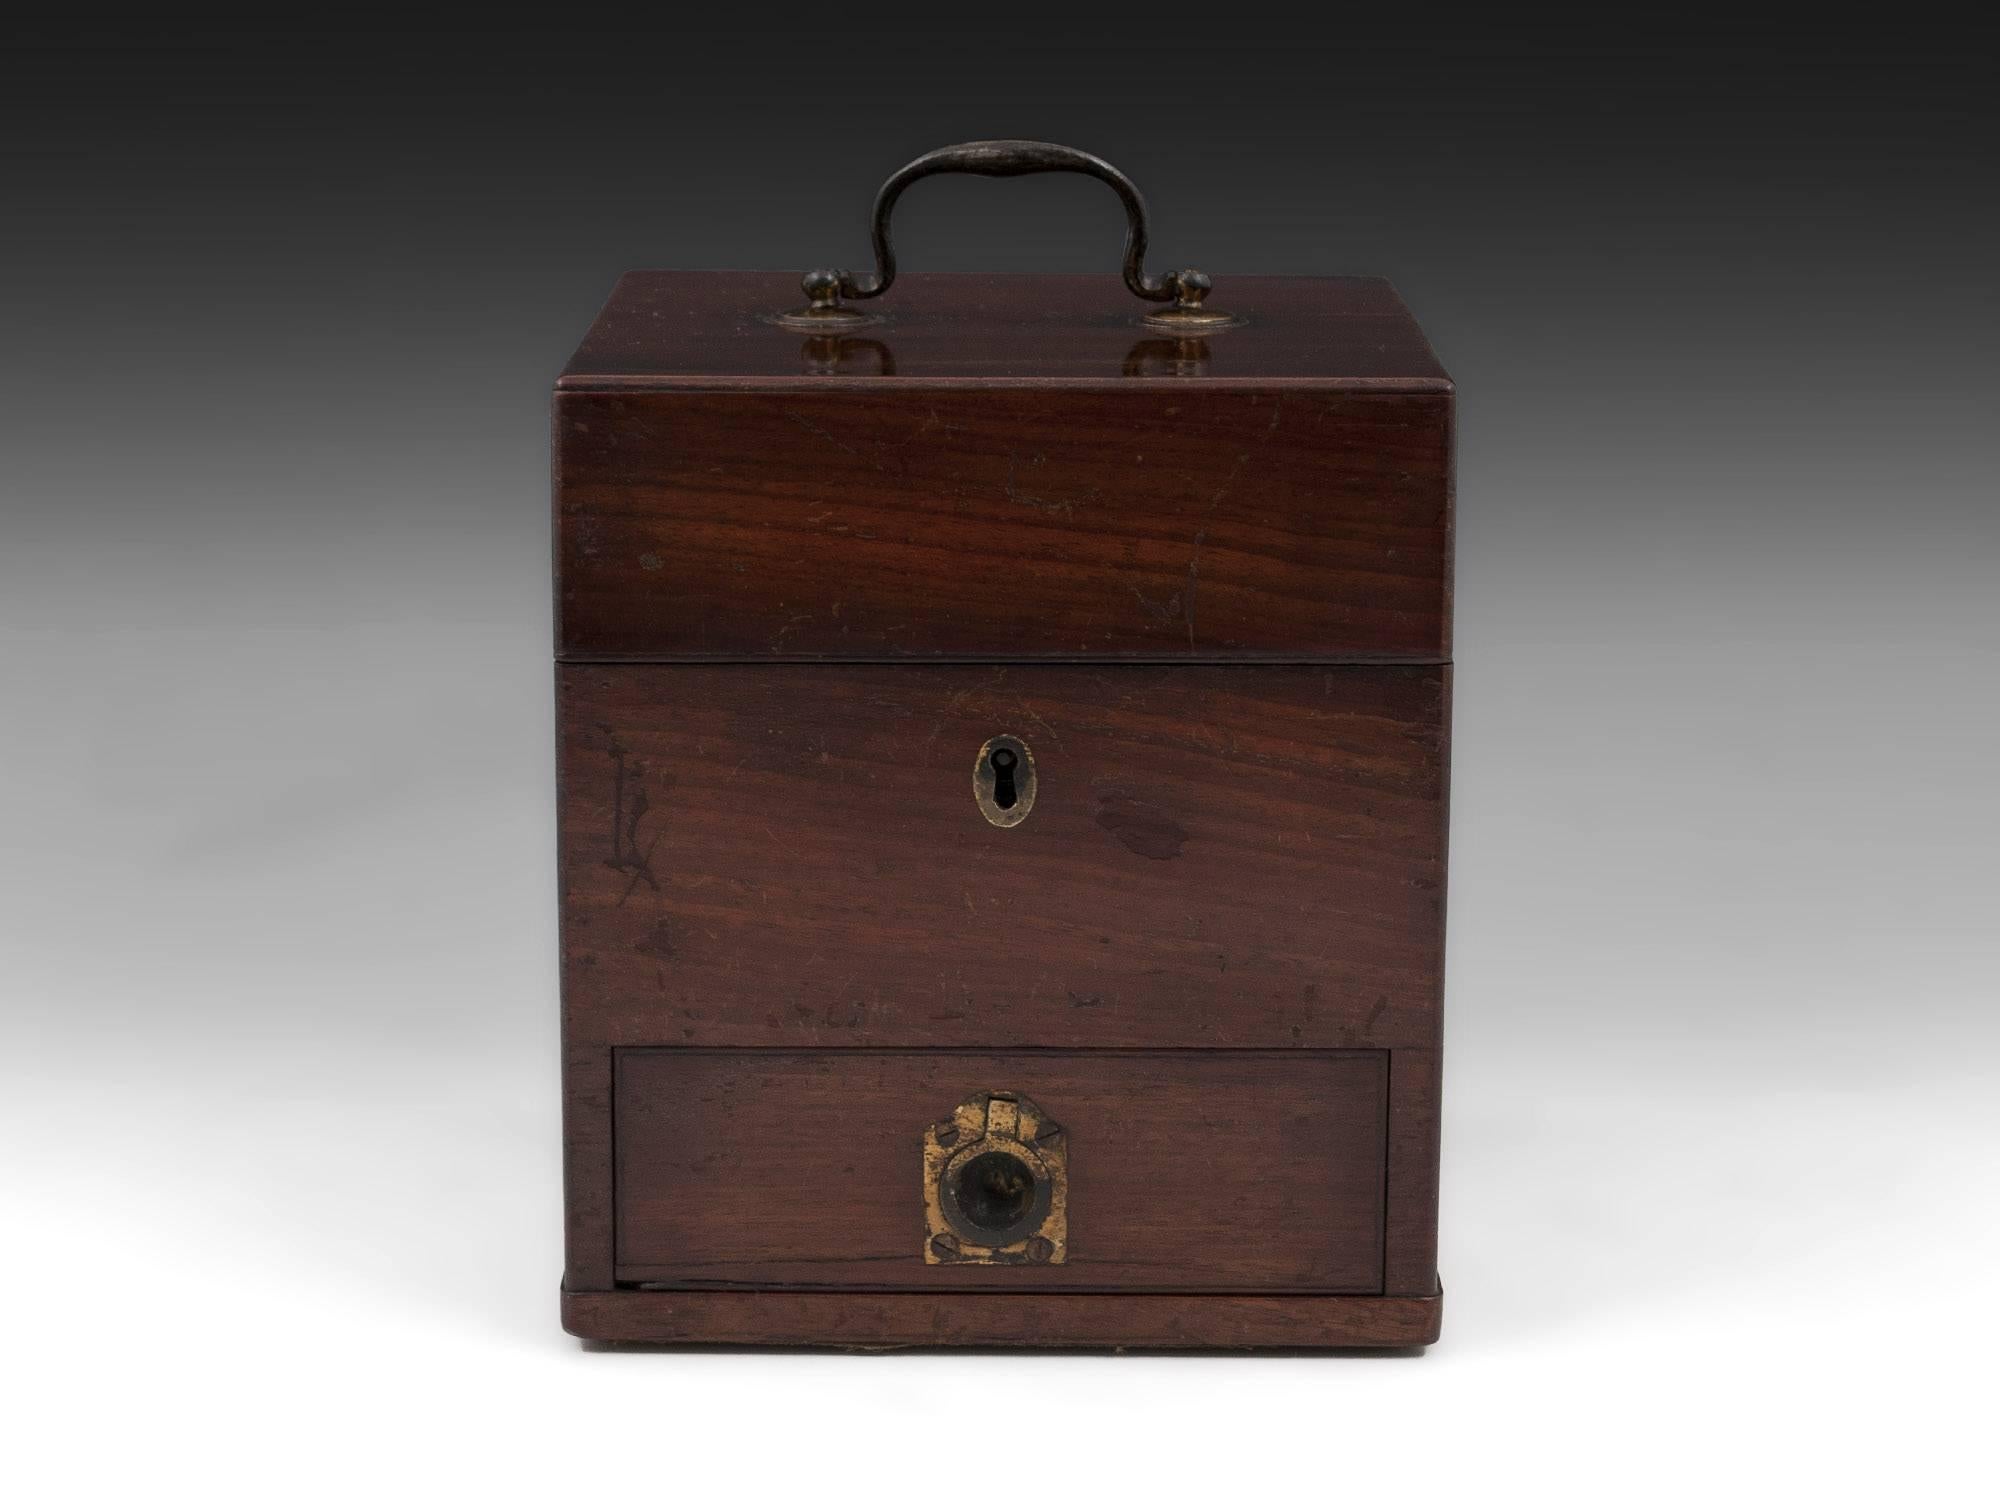 Antique apothecary box with large brass carry handle, escutcheon and drawer pull. 

Open the box reveals eleven various labelled and unlabelled bottles, some still containing their original contents. Each housed in a wooden compartment. The